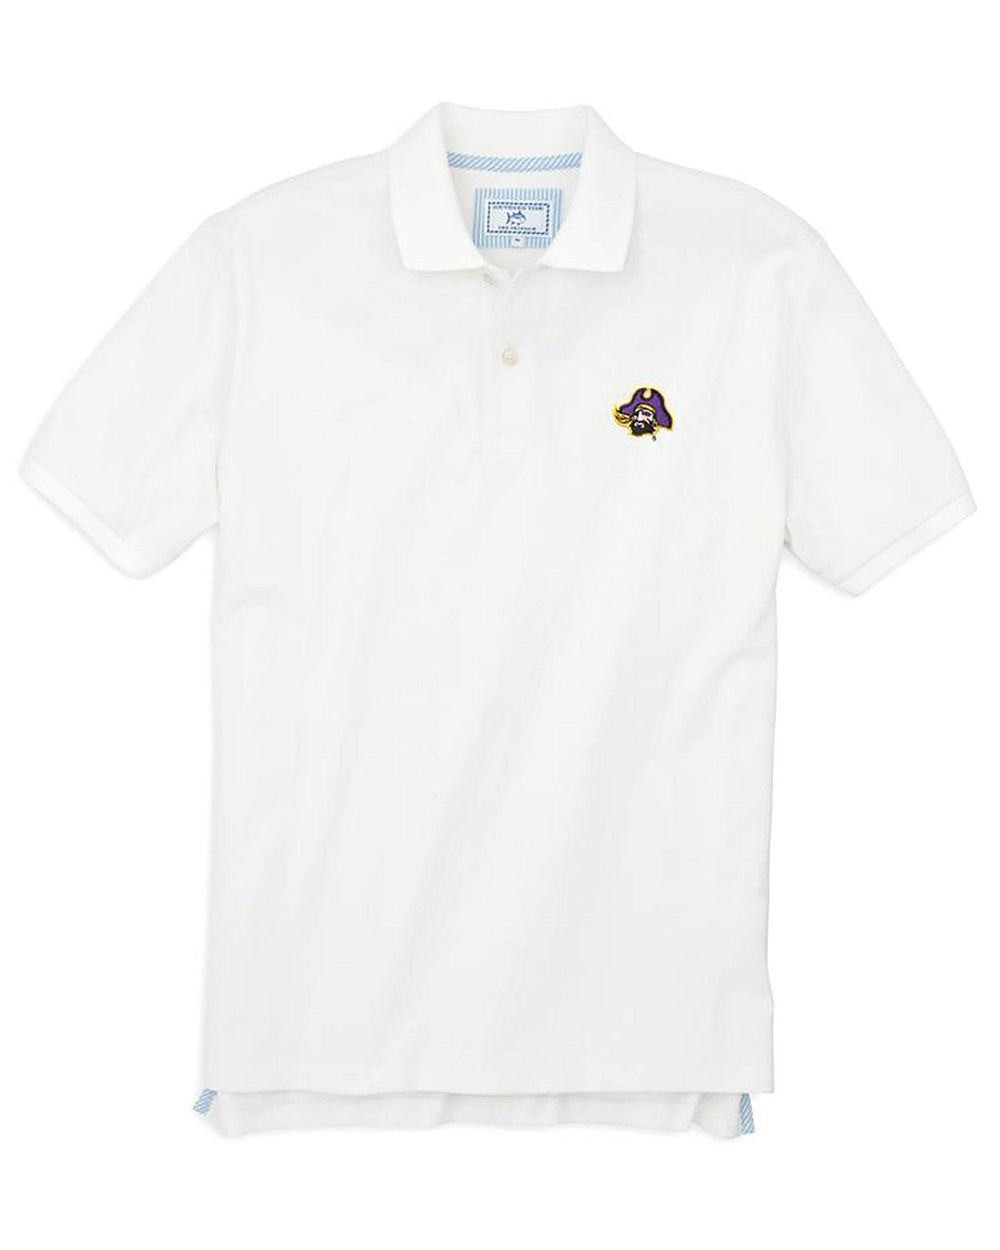 The front view of the Men's White East Carolina Pique Polo Shirt by Southern Tide - Classic White